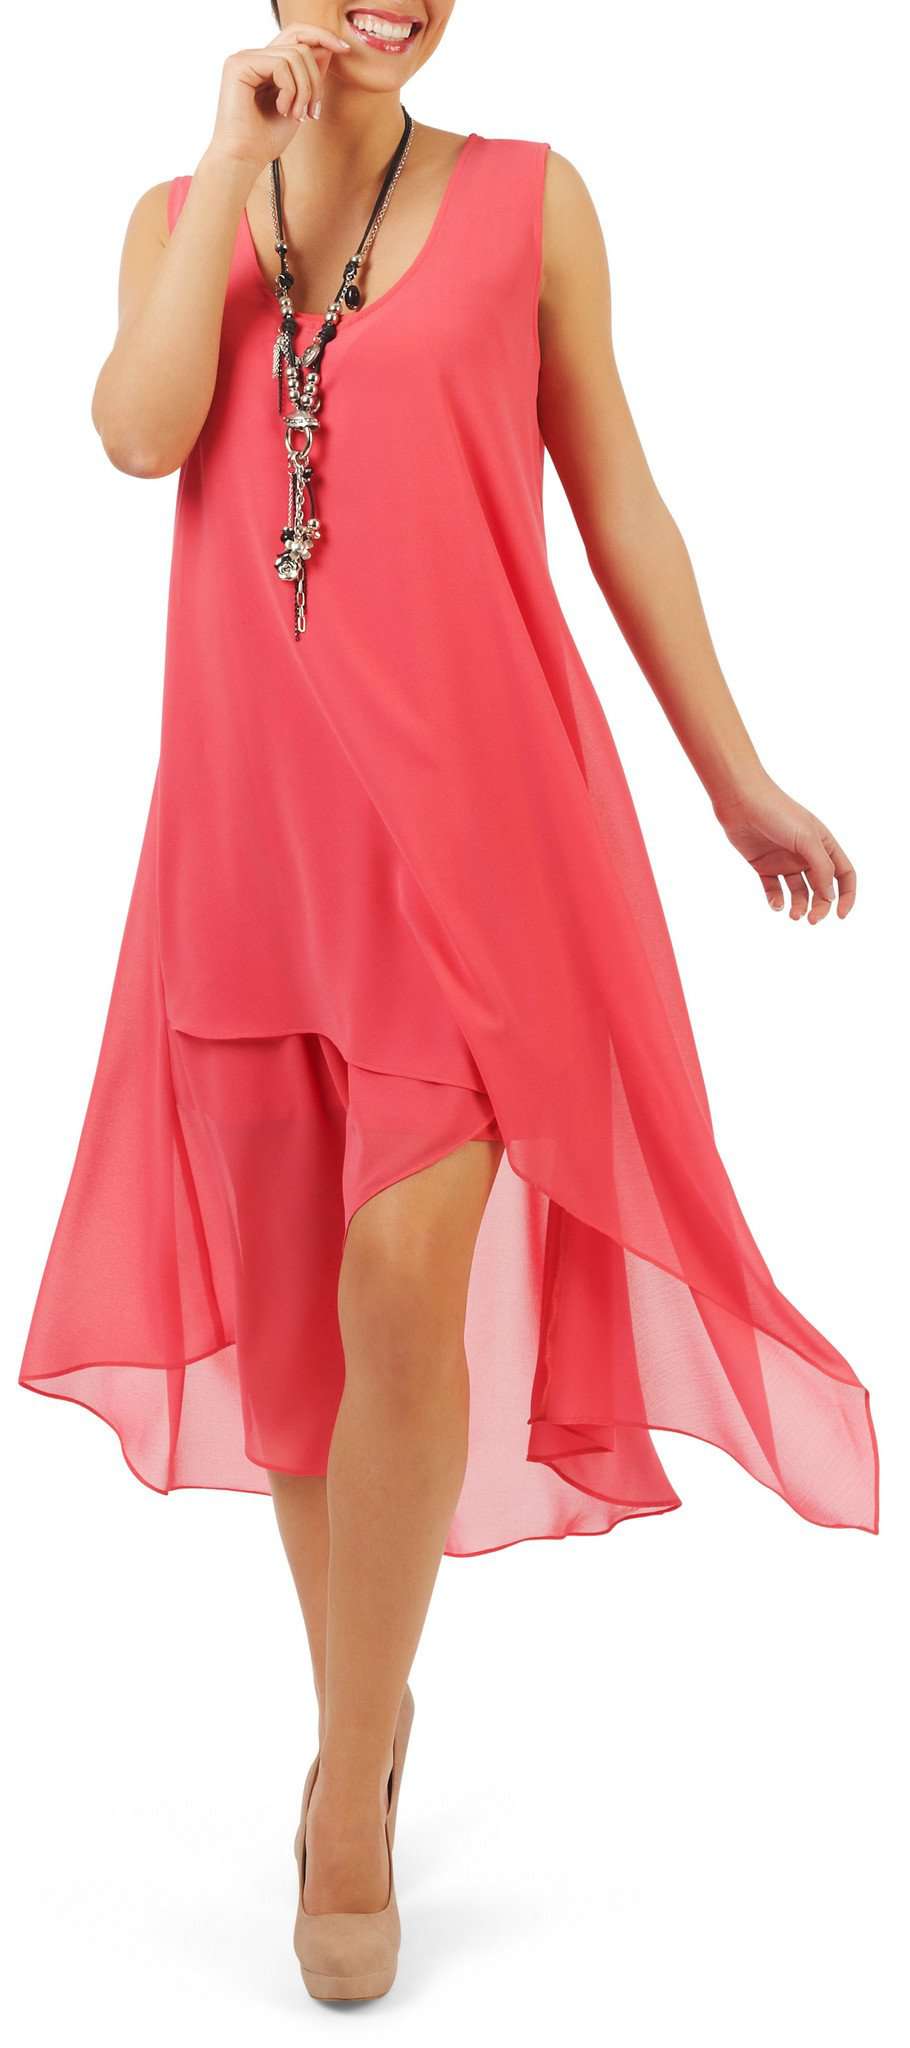 Women's Dresses Coral Chiffon Flattering Fit Quality Fabric Made in Canada  Yvonne Marie Boutiques